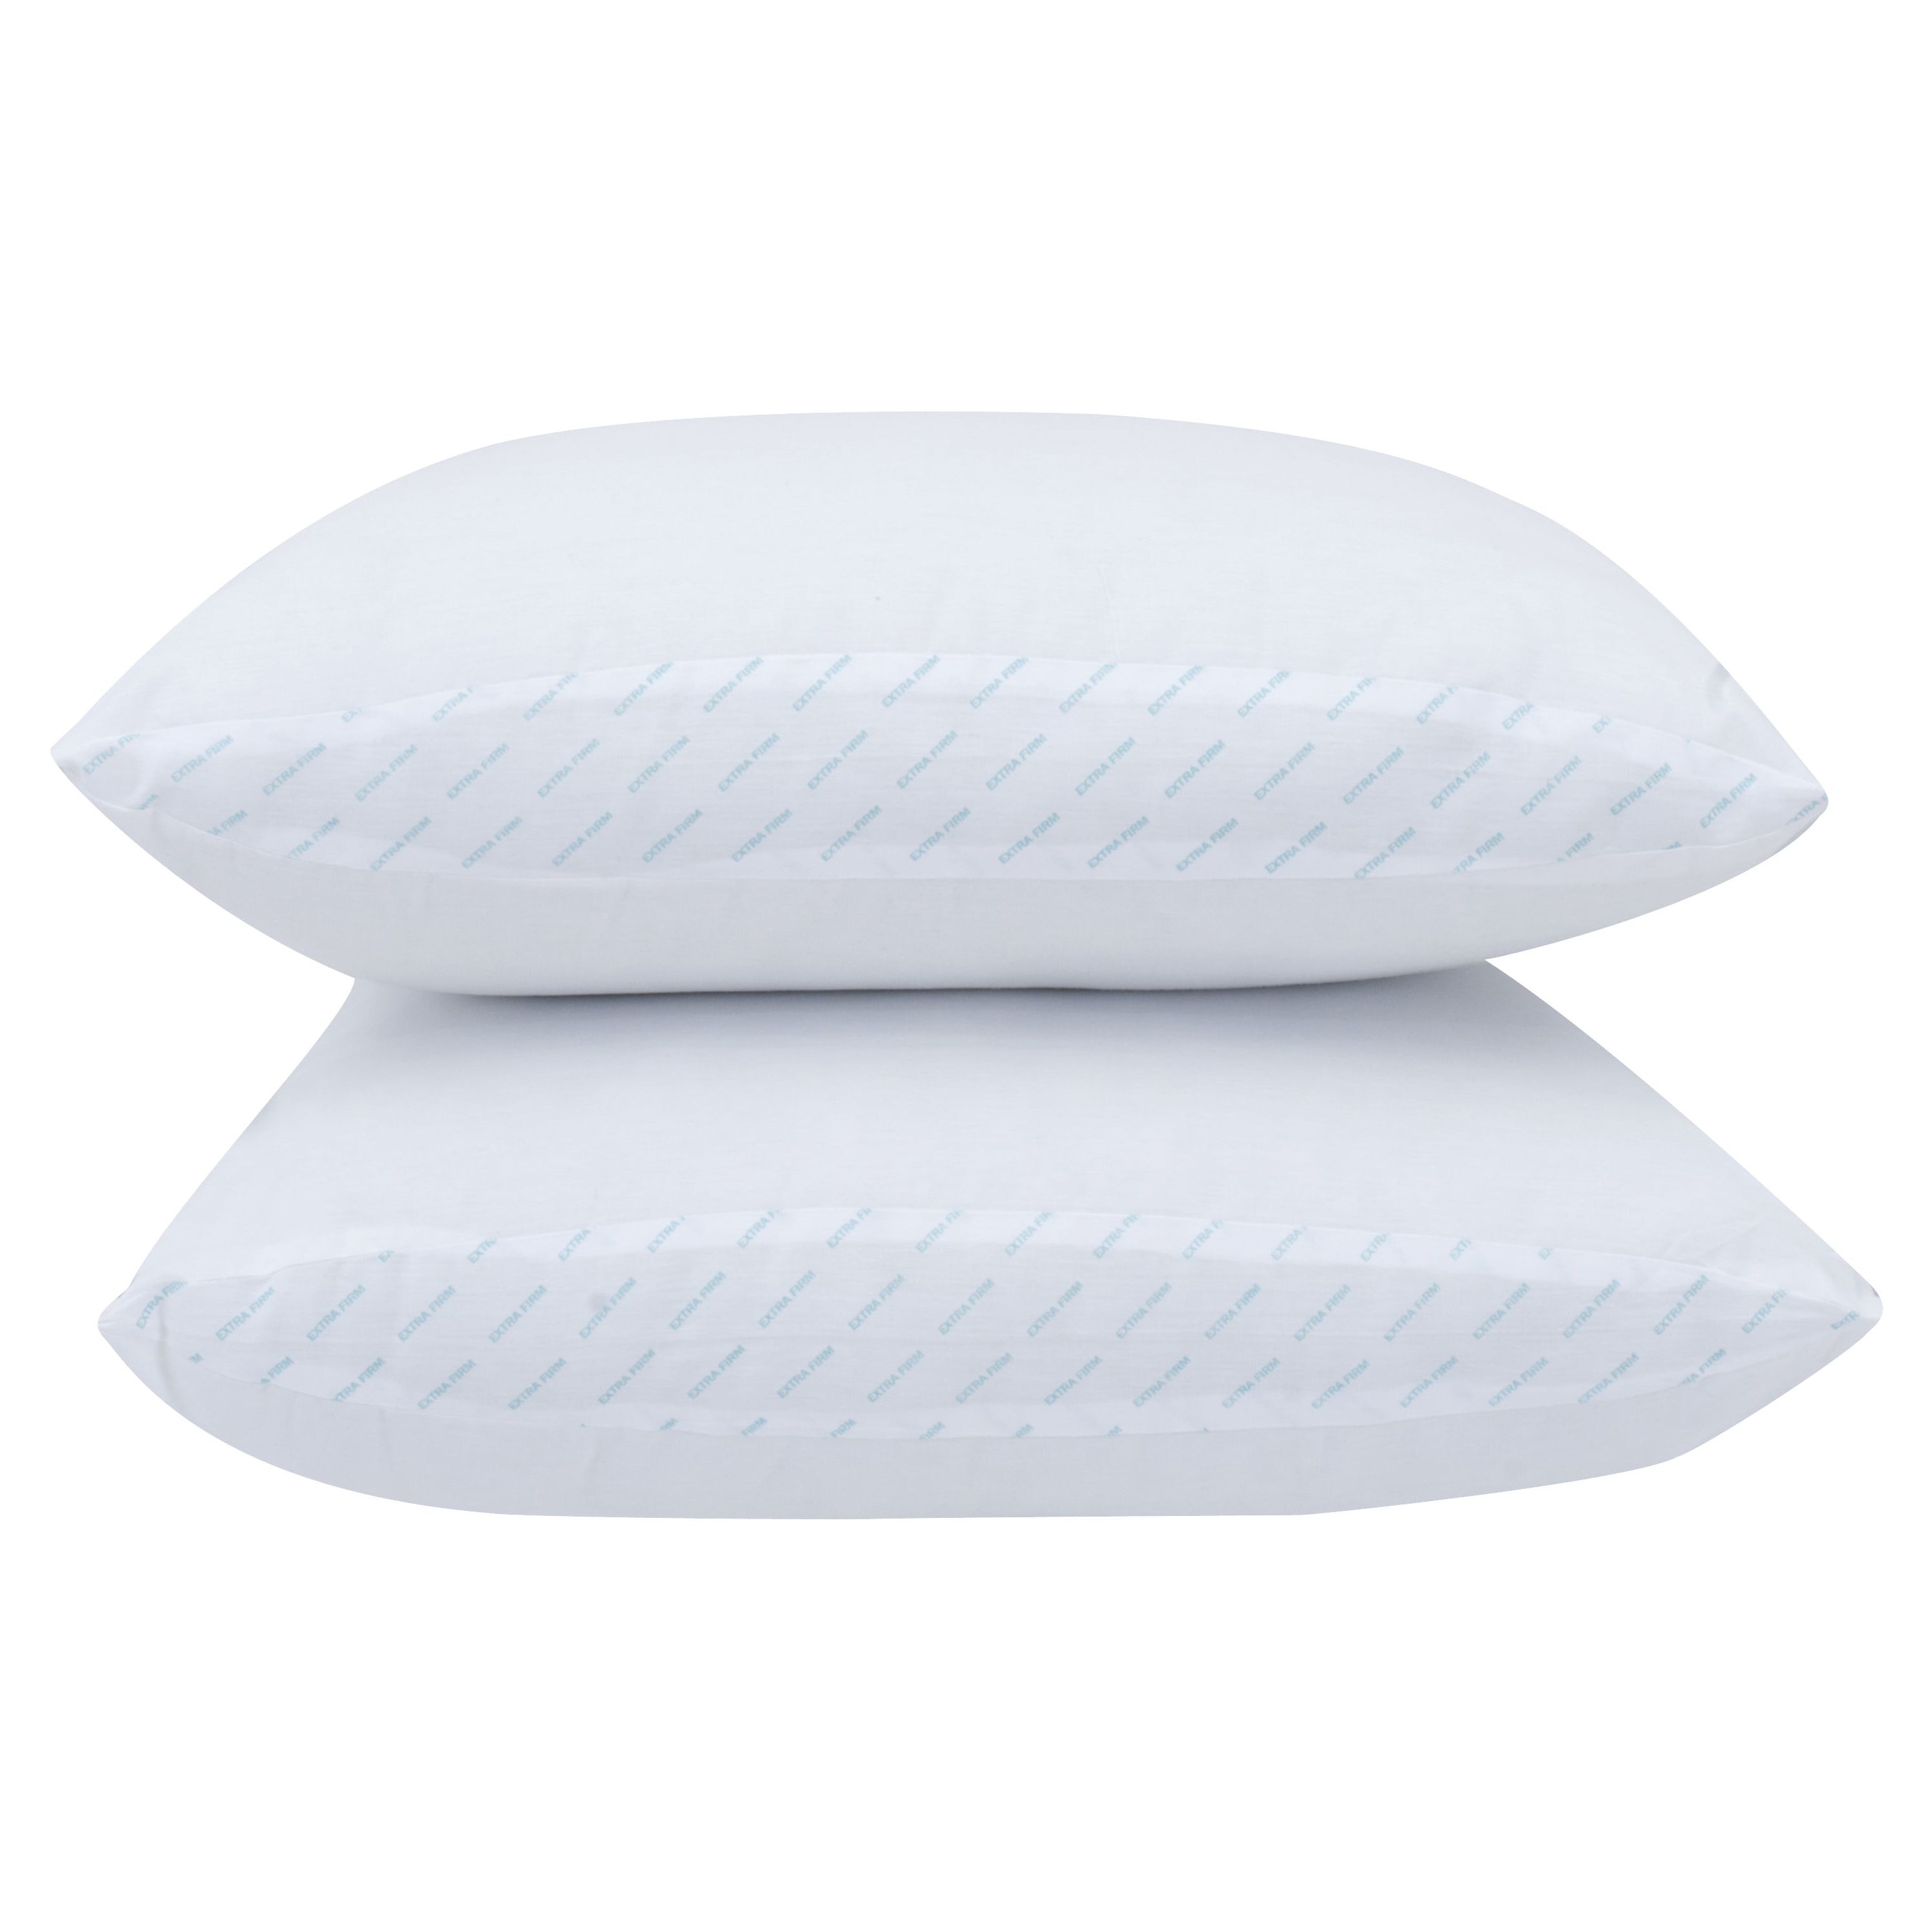 Mainstays Extra Firm Support Pillow, Set of 2, Standard, 200 Thread Count Cotton - image 1 of 7